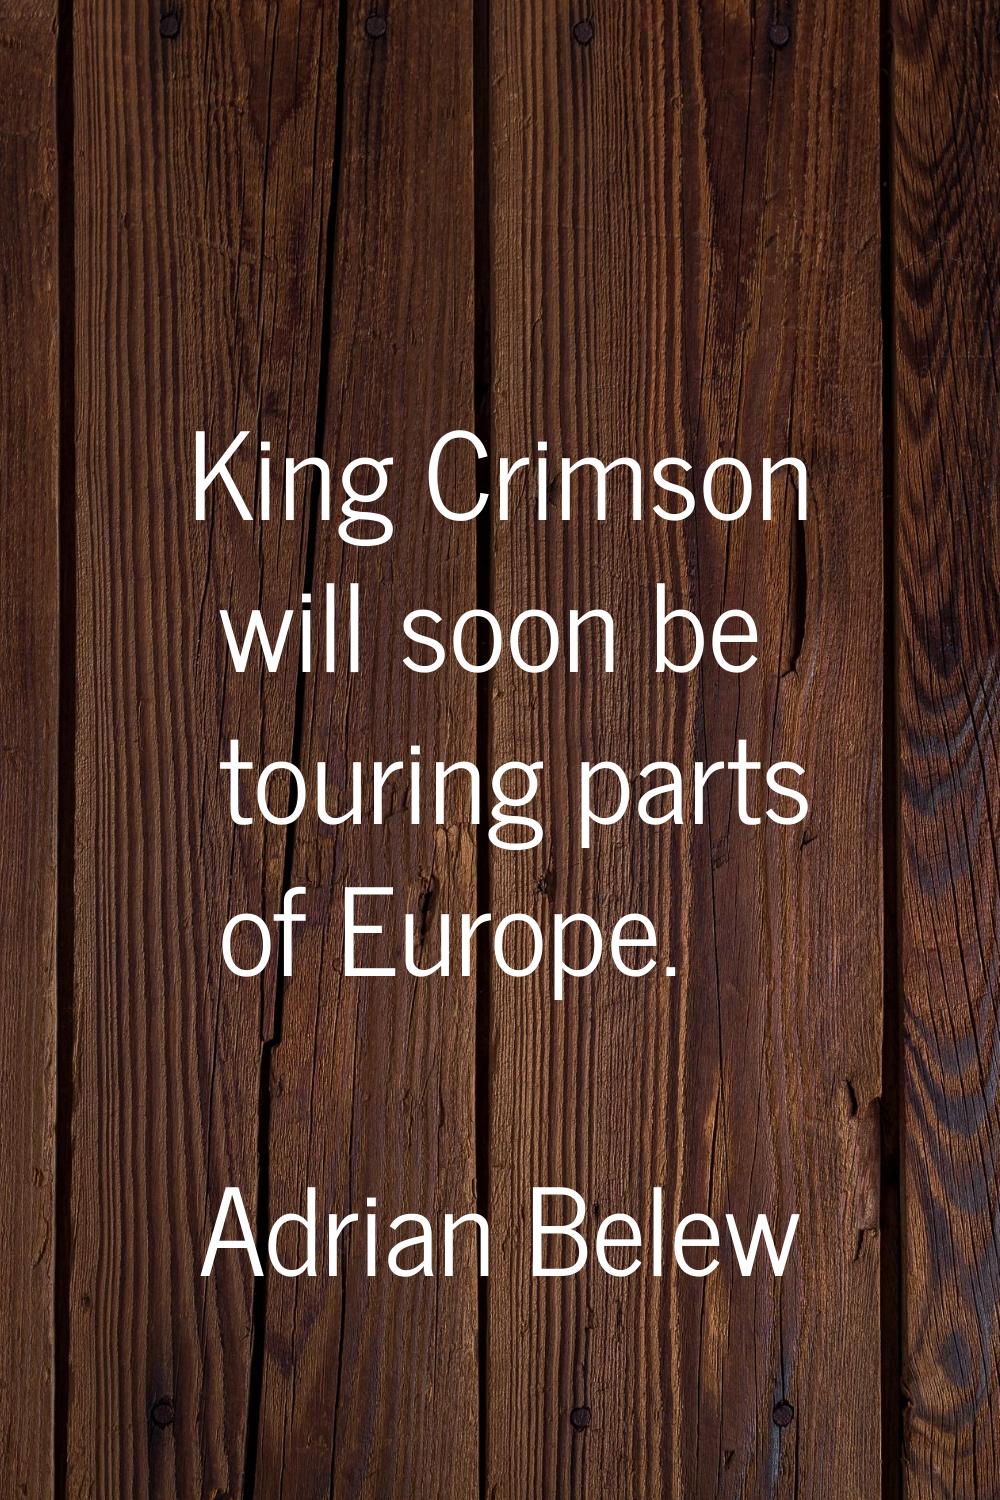 King Crimson will soon be touring parts of Europe.